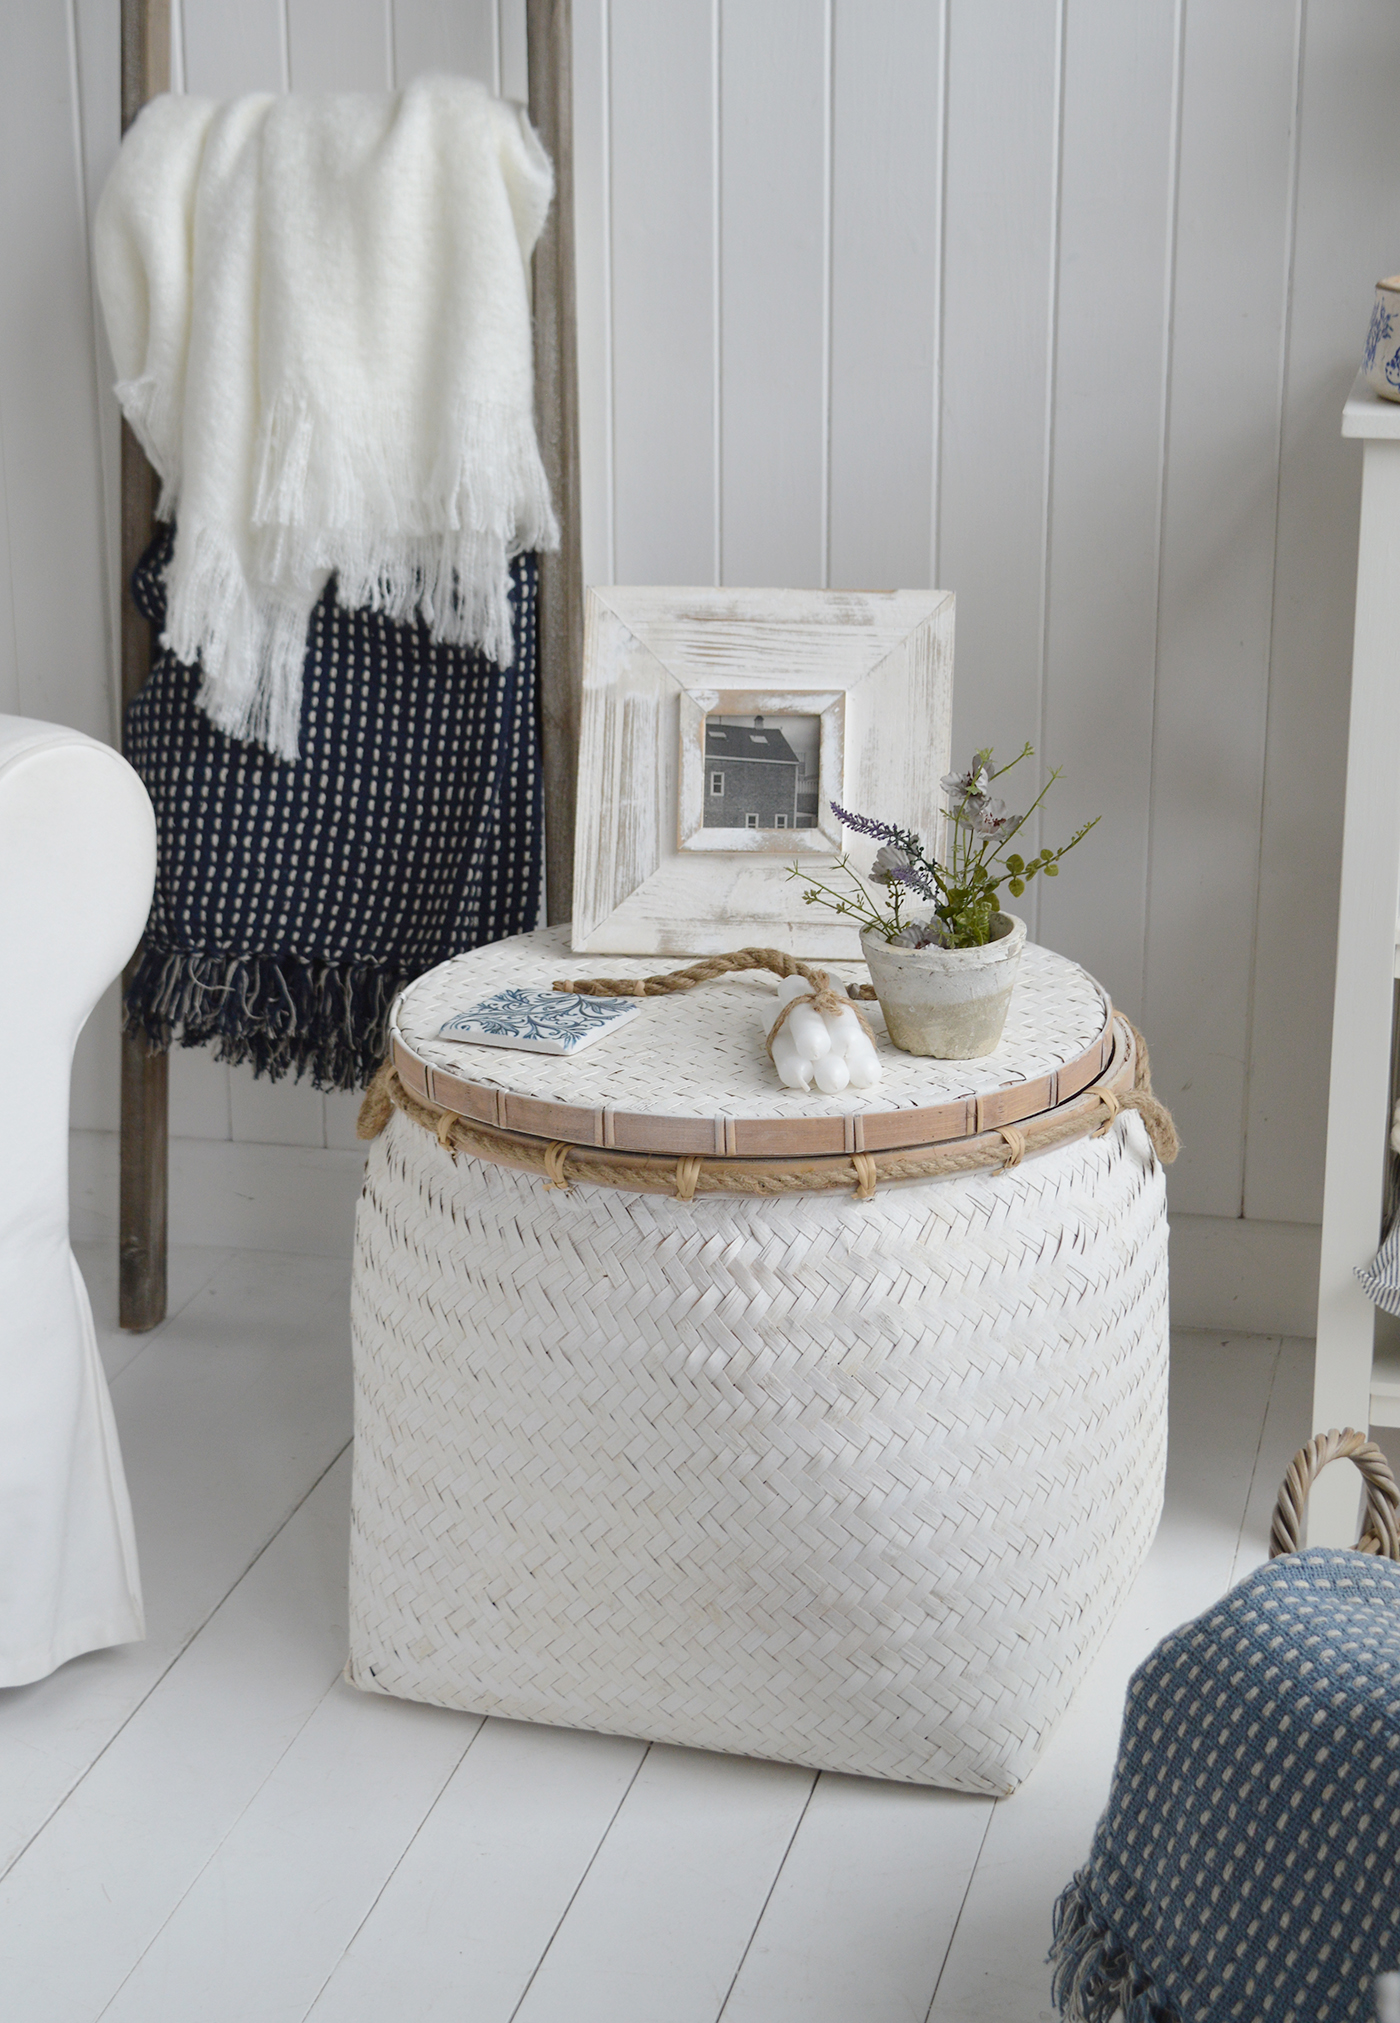 A close image of the Nantucket coastal furniture, an aged white basket table with a lid for great storage